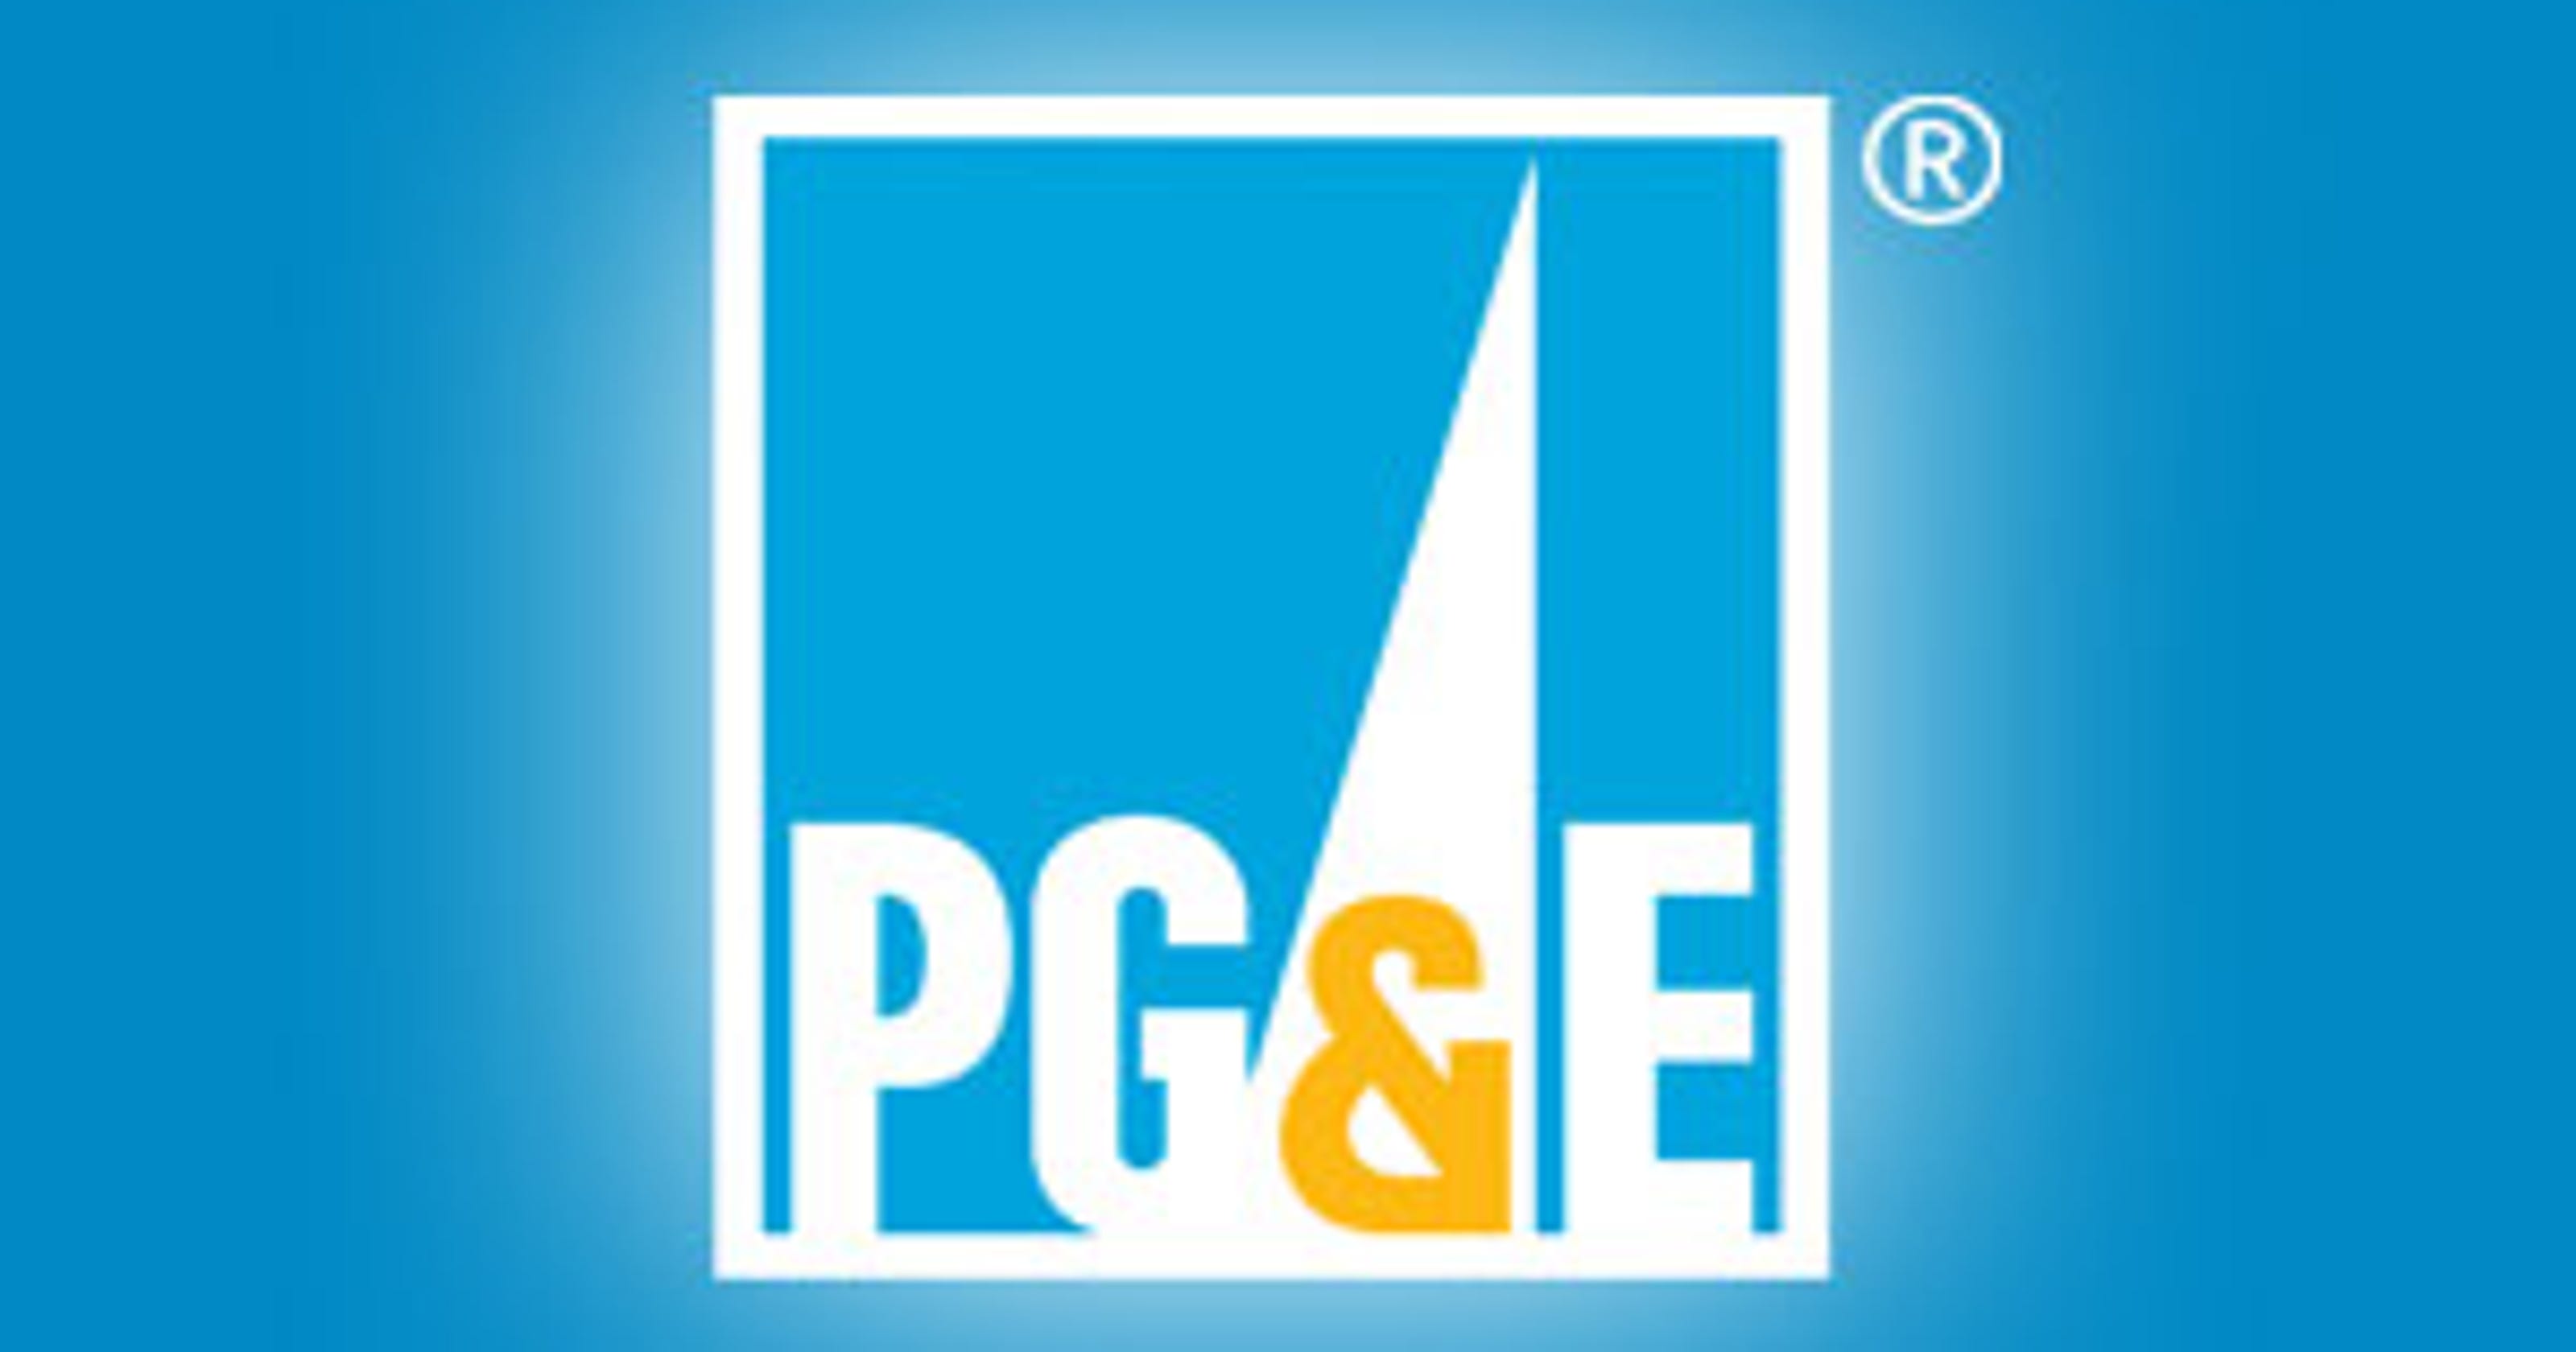 new-higher-pg-e-rates-kick-in-this-month